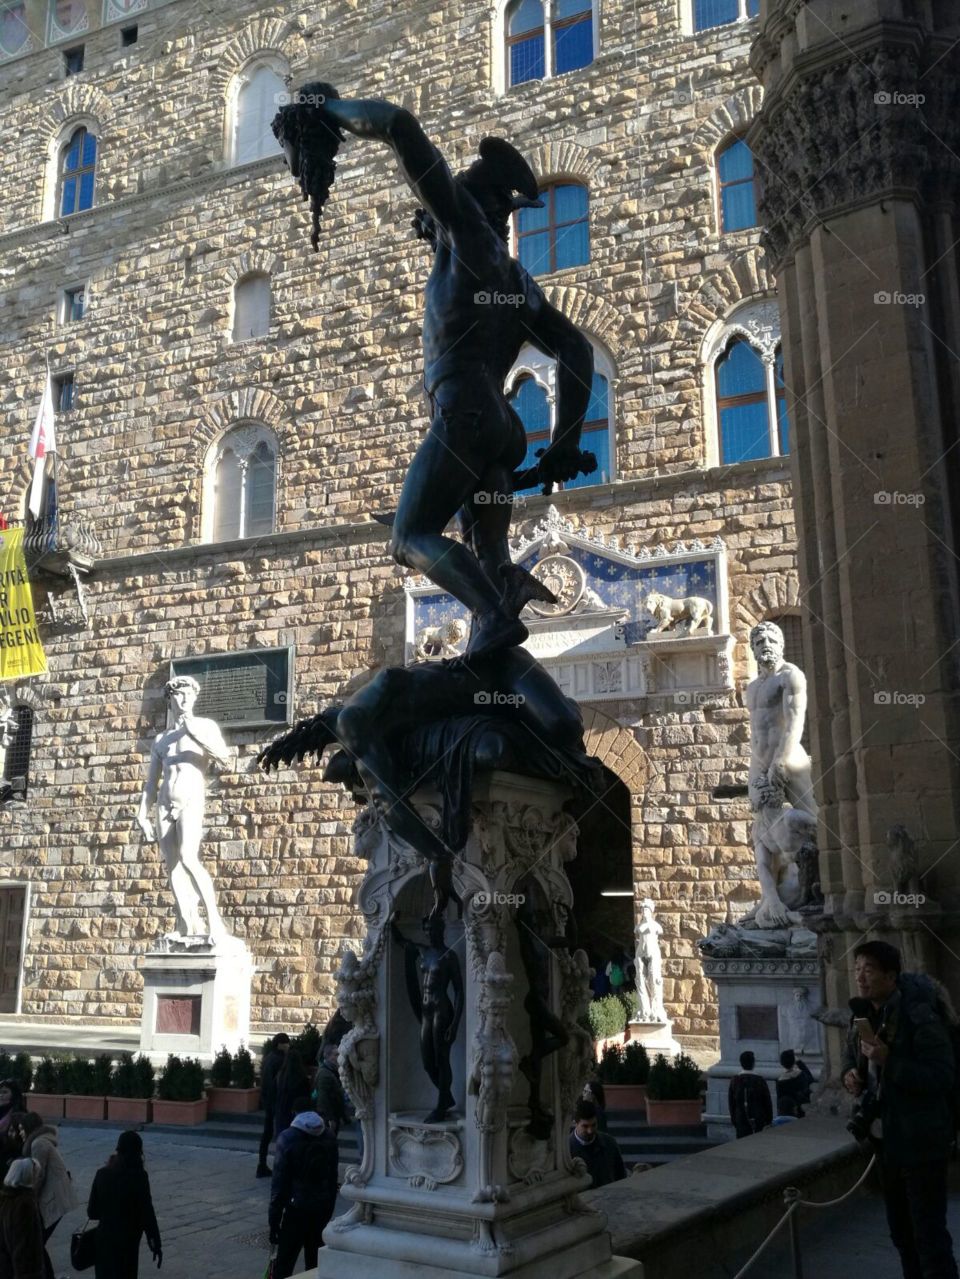 Perseo decapitation of Medusa, statue location Firenze Italy